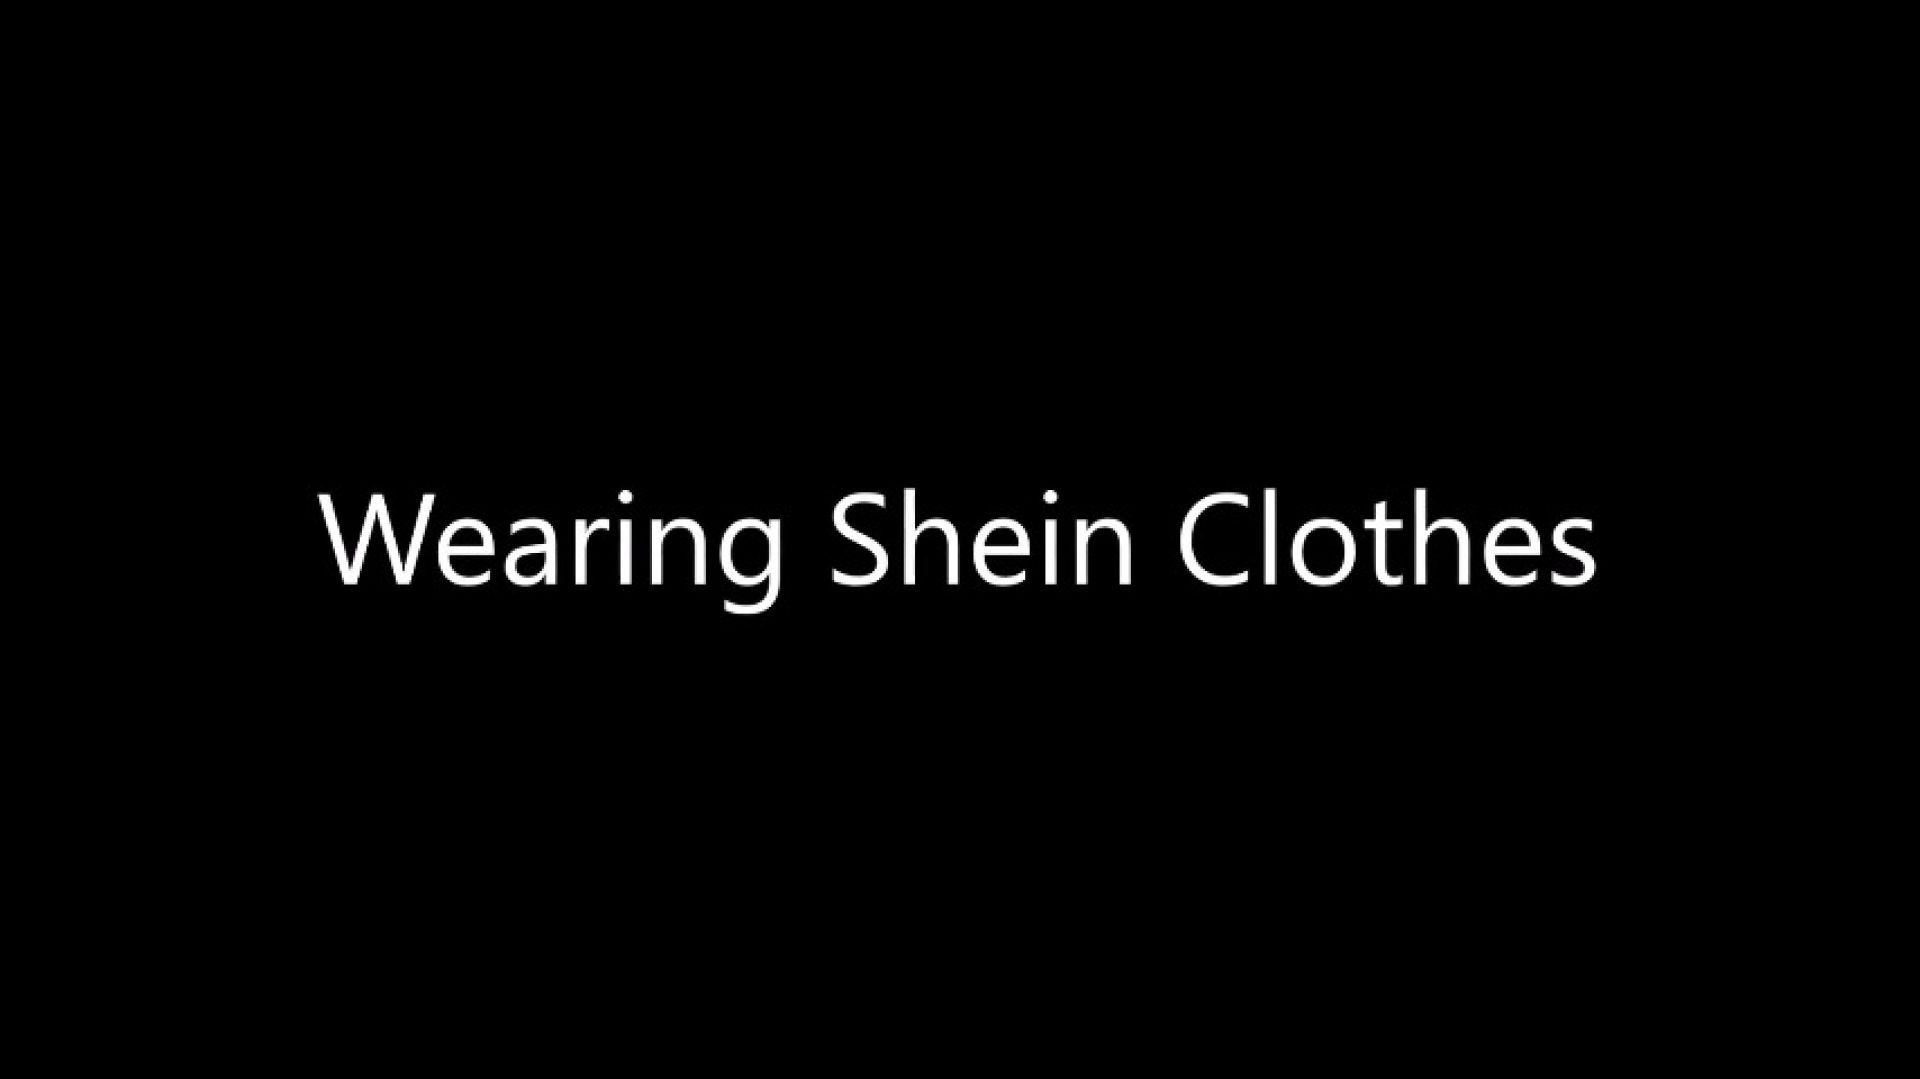 Wearing Shein Clothes